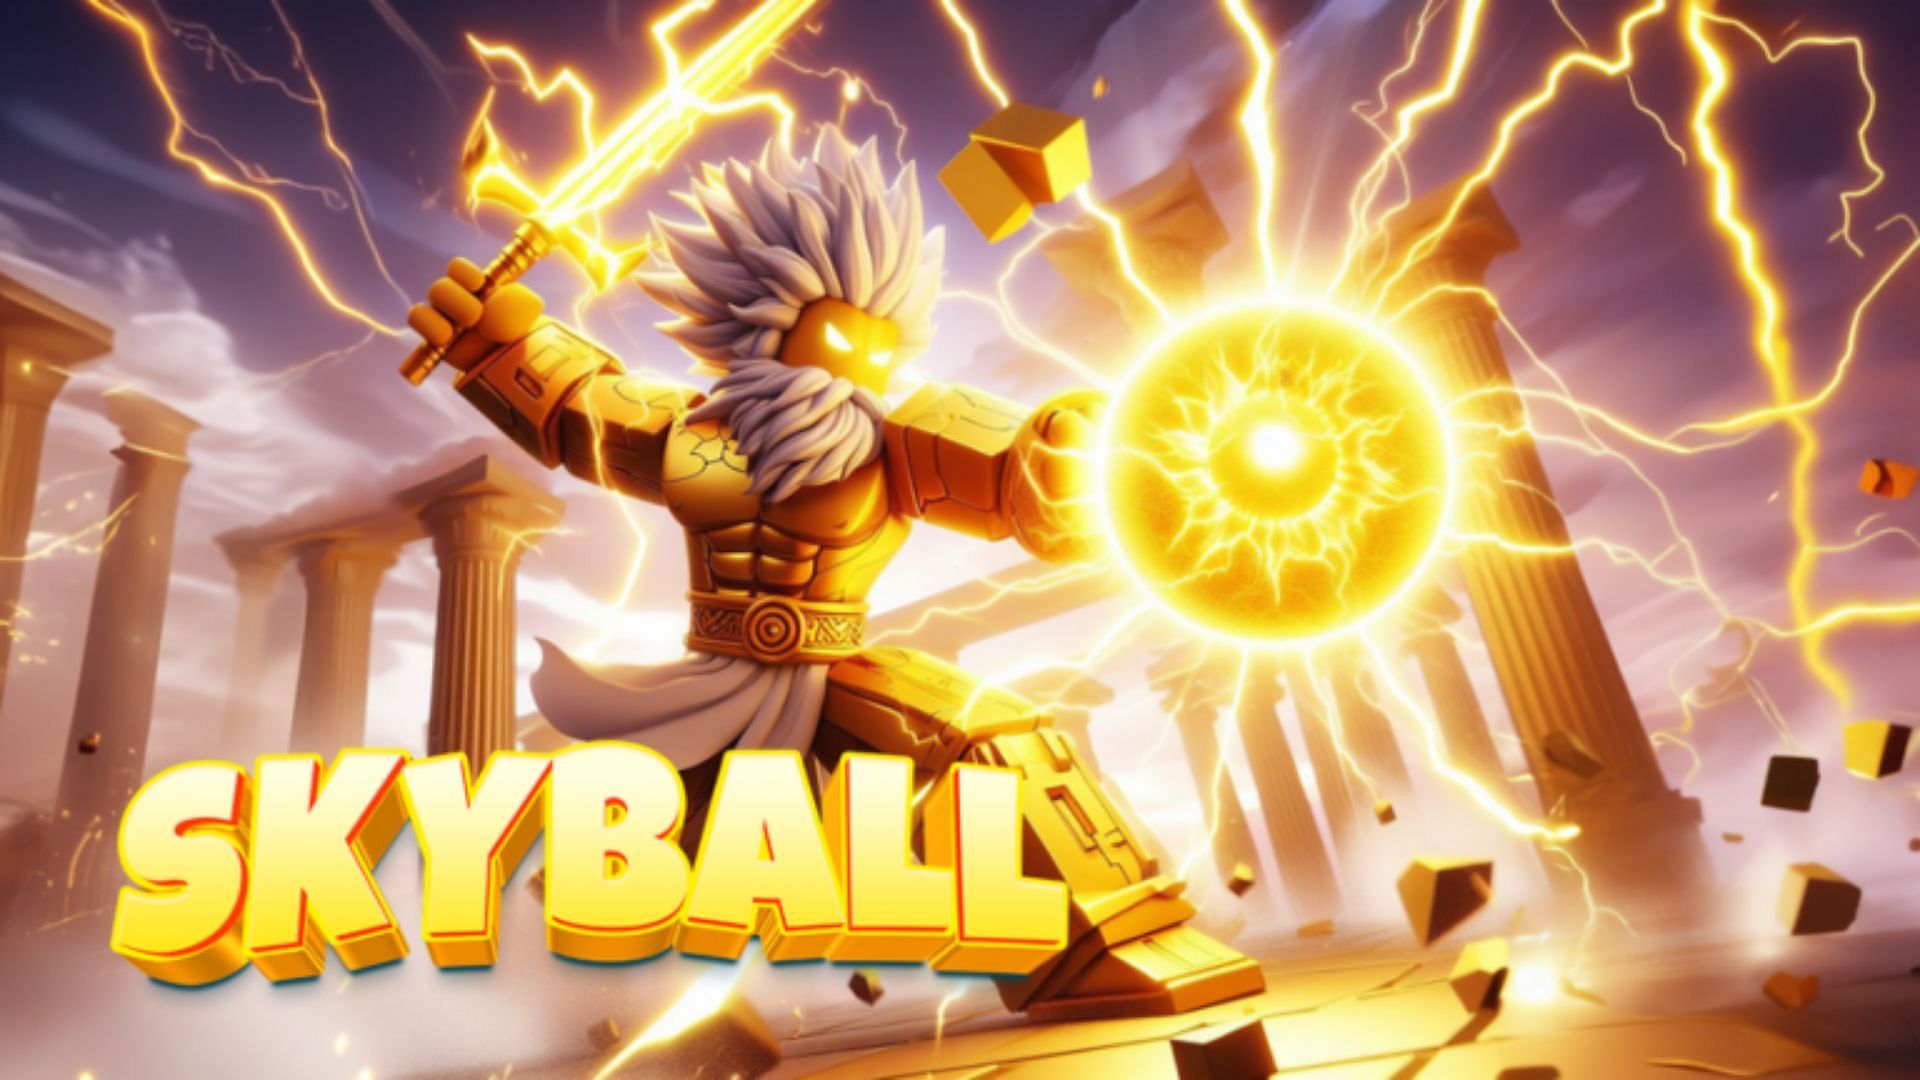 Codes for Sky Ball and their importance